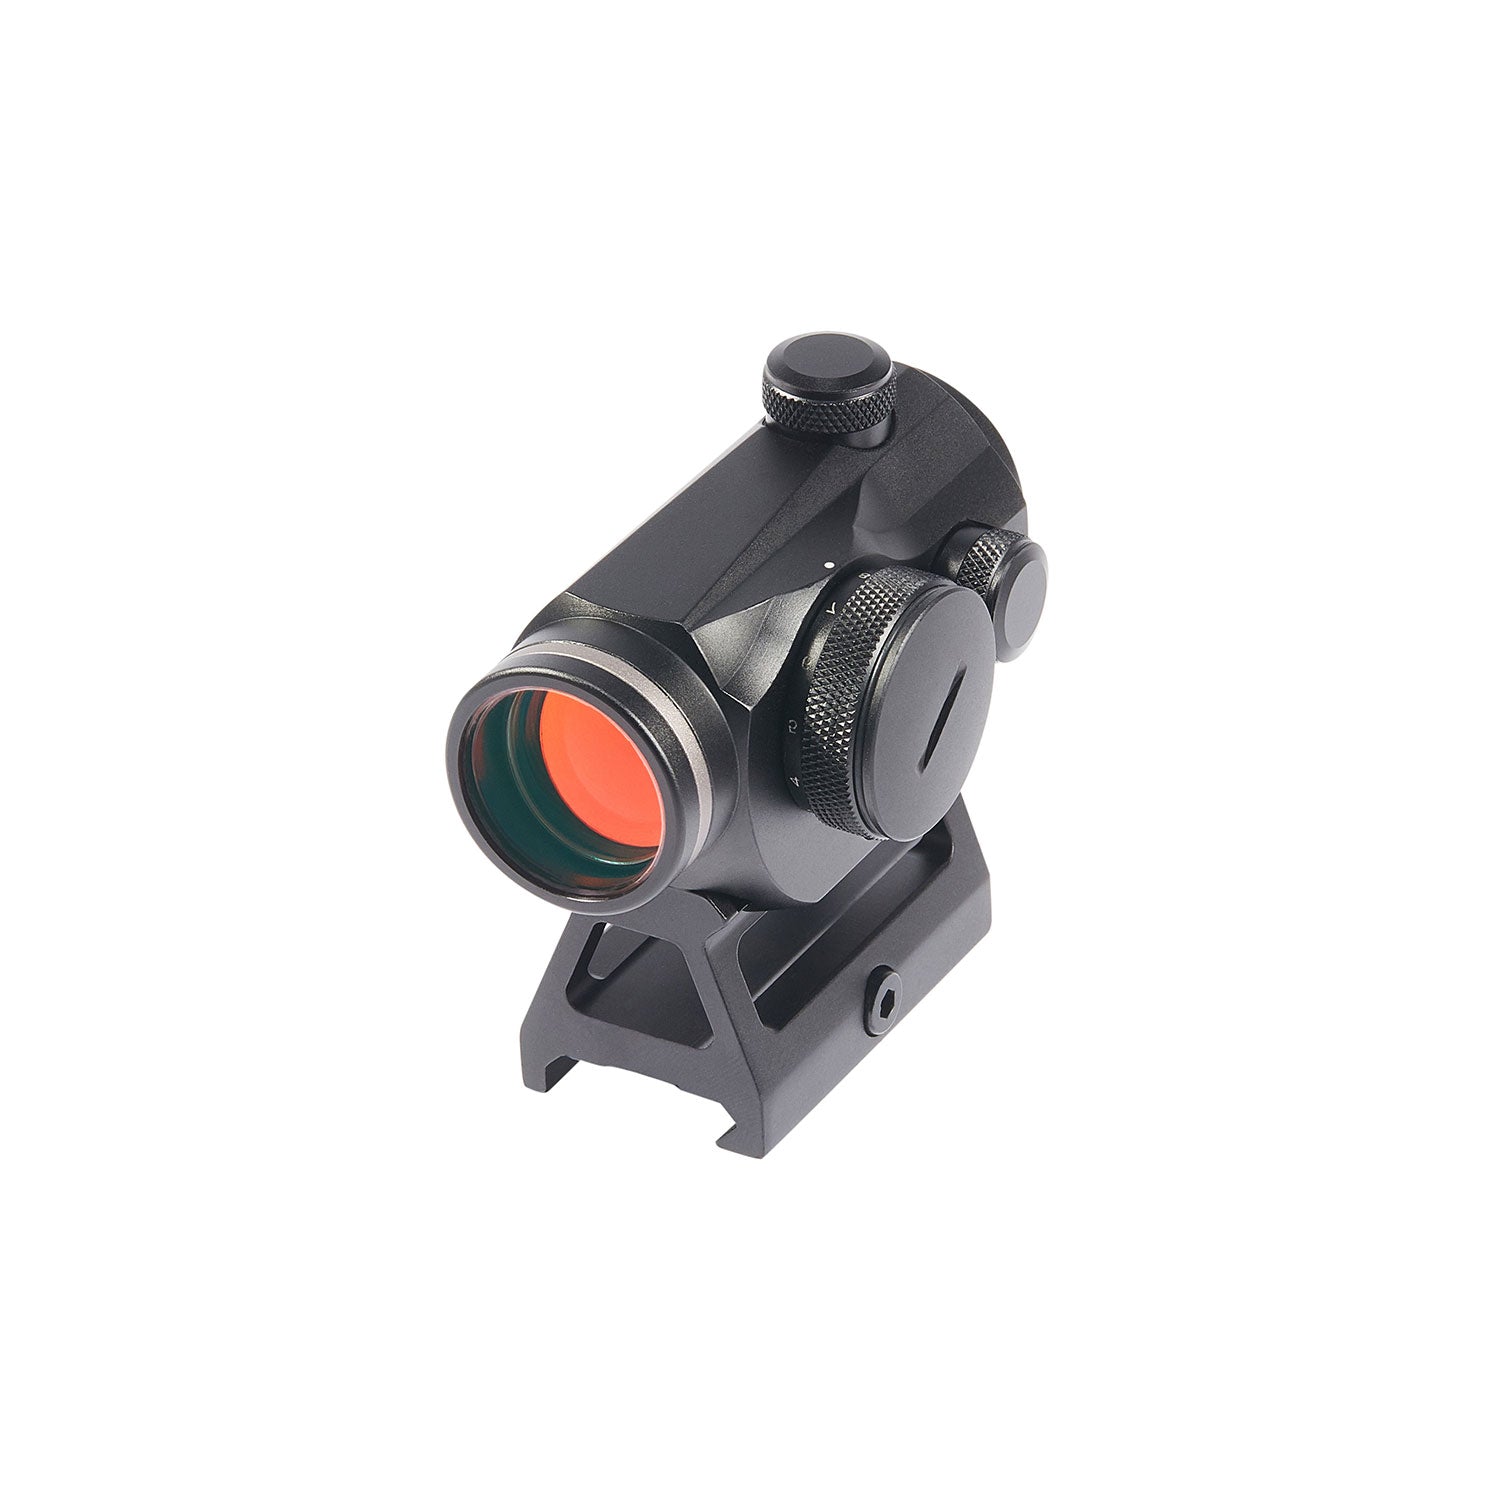 1x20 Red Dot Sight, 4.5 MOA Rifle Scope for Standard Picatinny or Weav